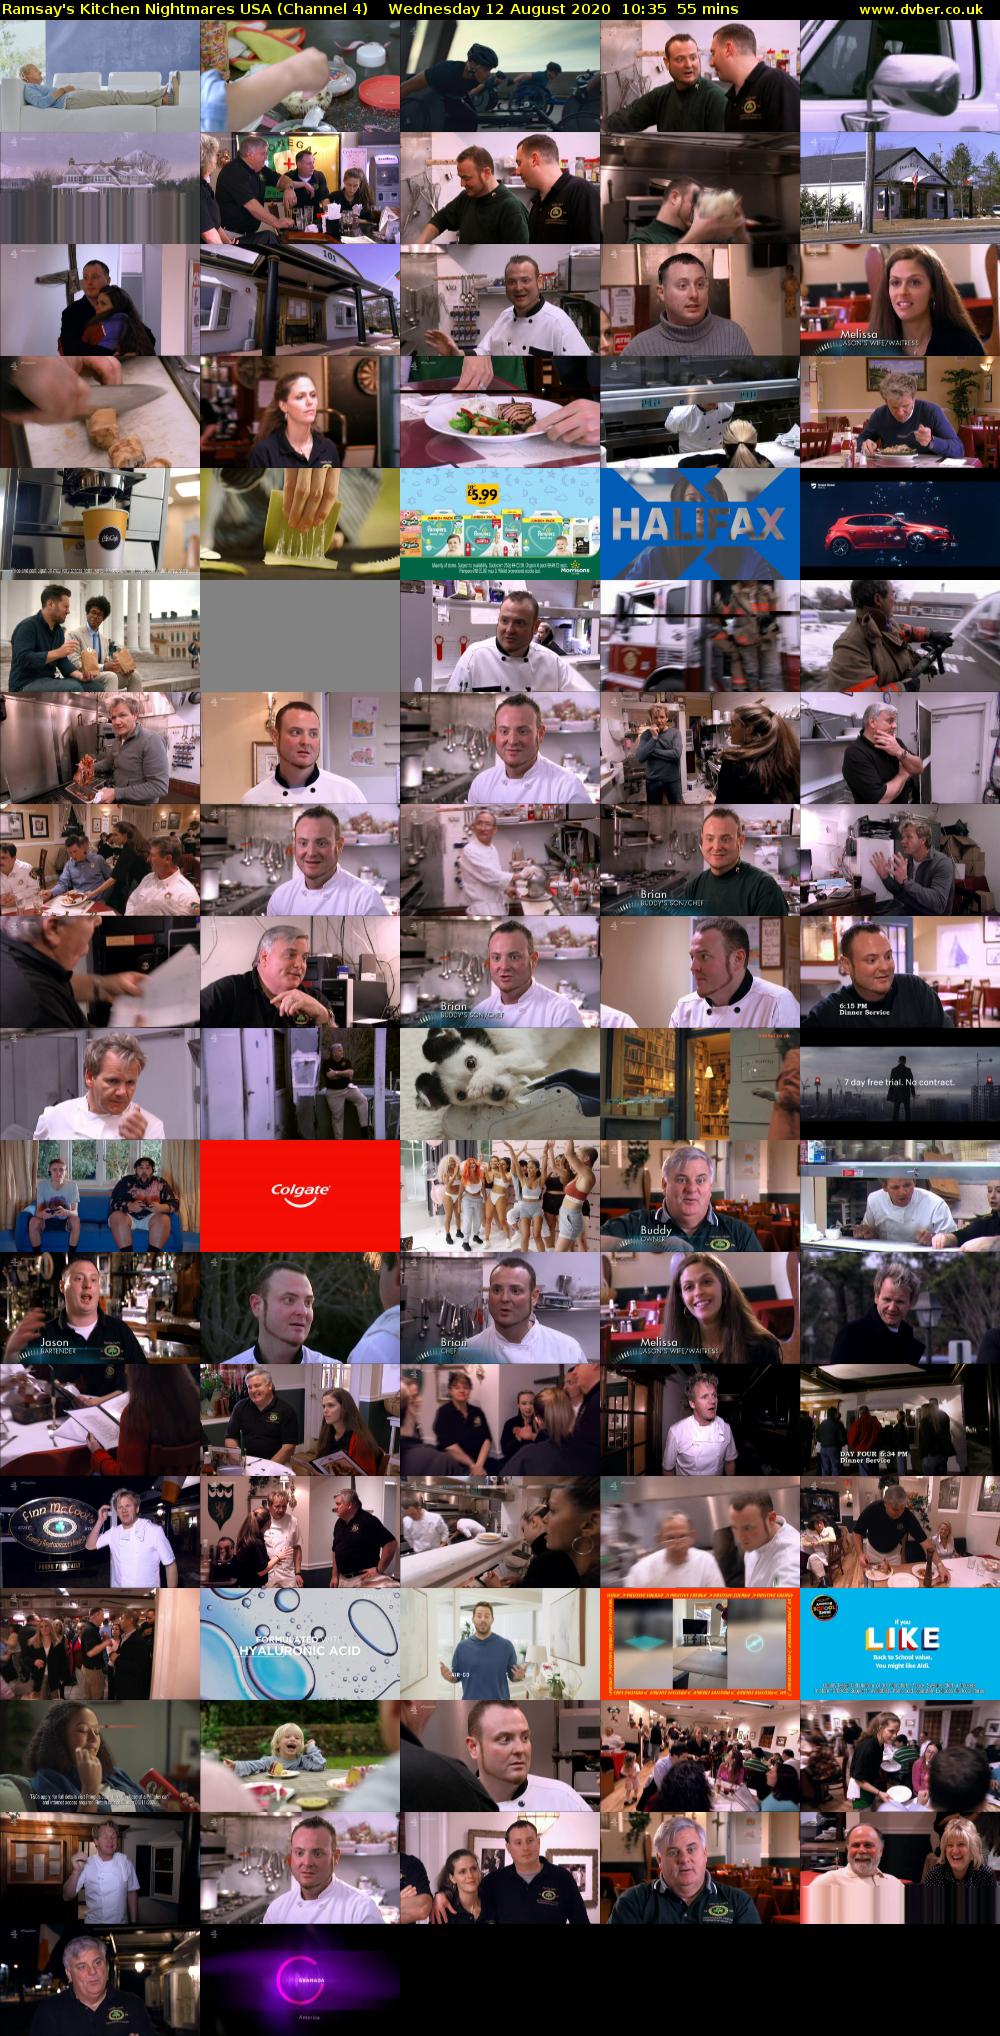 Ramsay's Kitchen Nightmares USA (Channel 4) Wednesday 12 August 2020 10:35 - 11:30